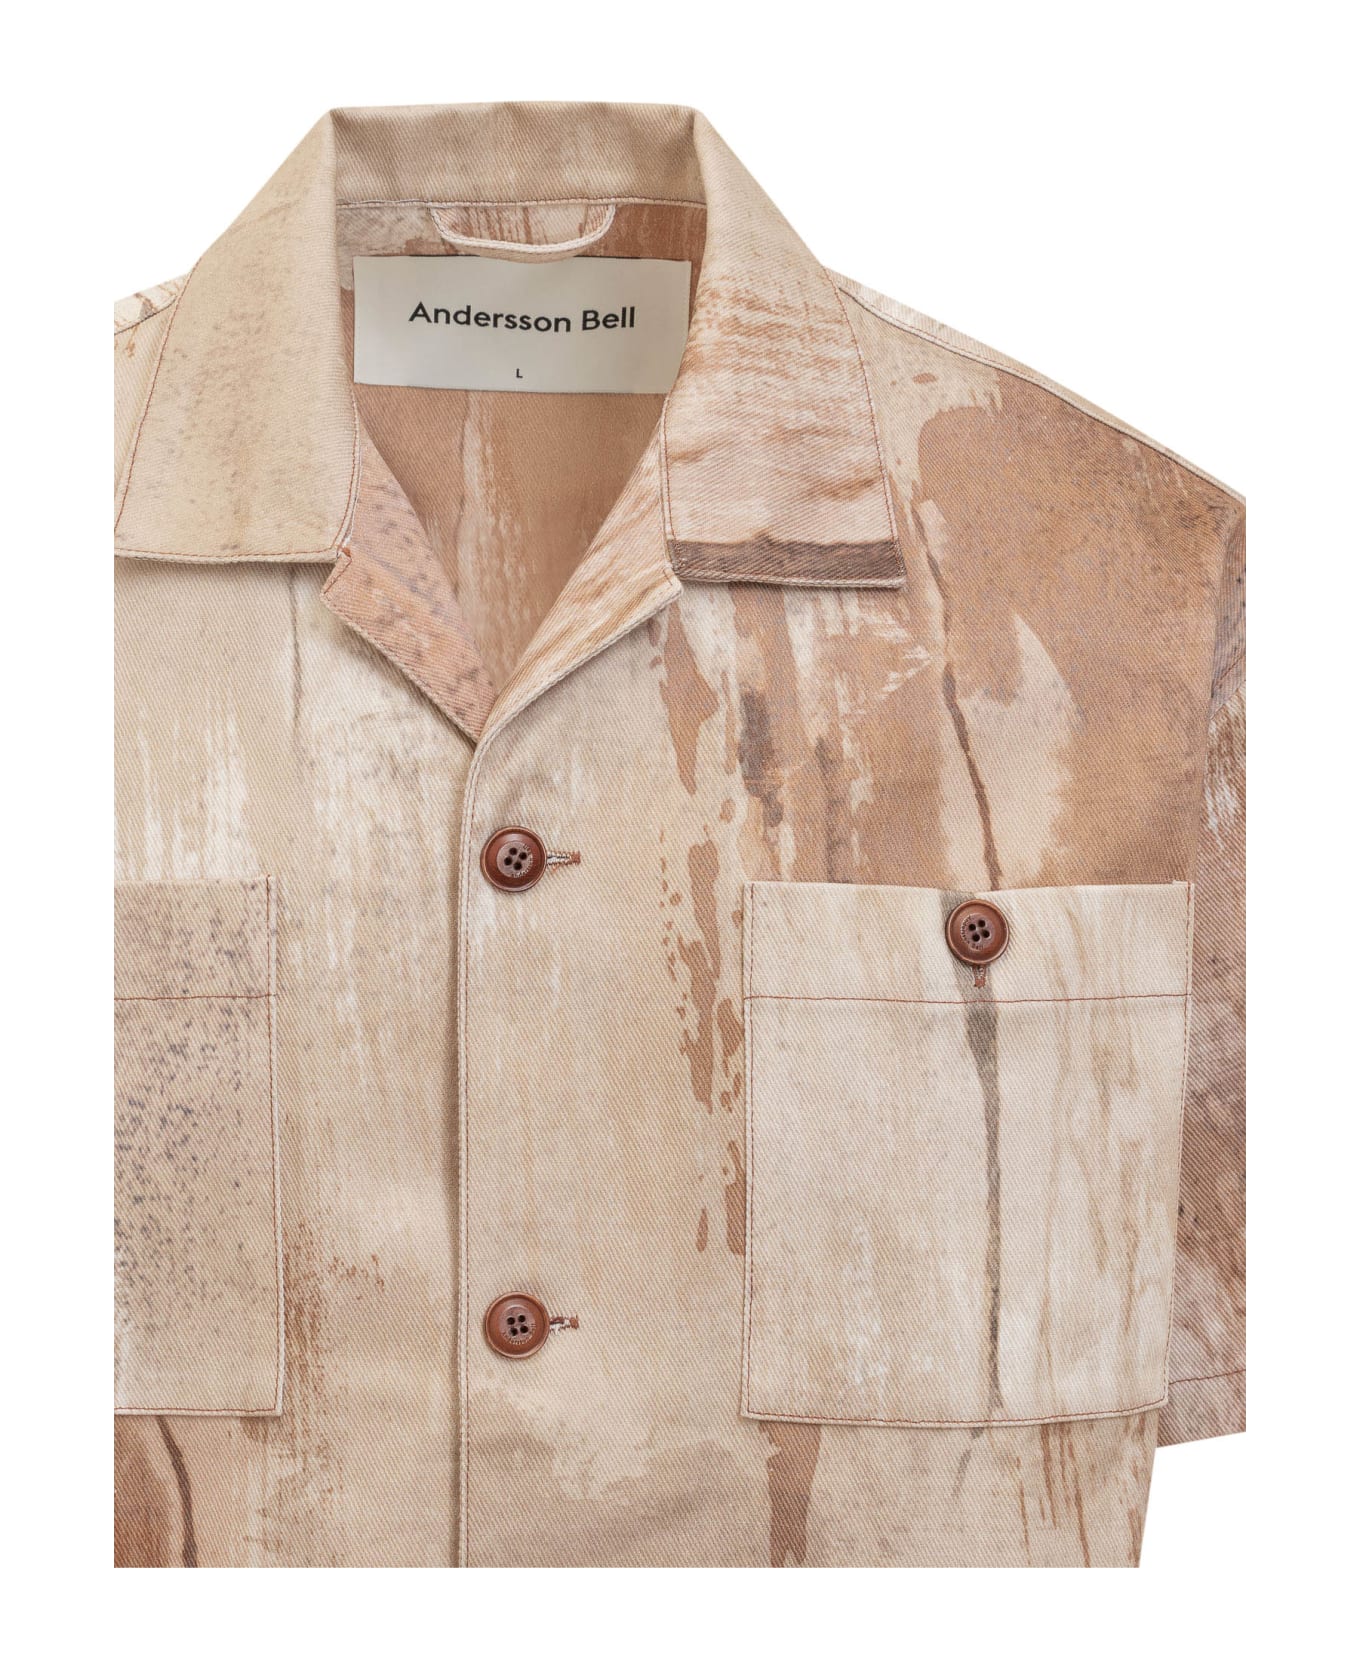 Andersson Bell Tie Dye Shirt - SAND